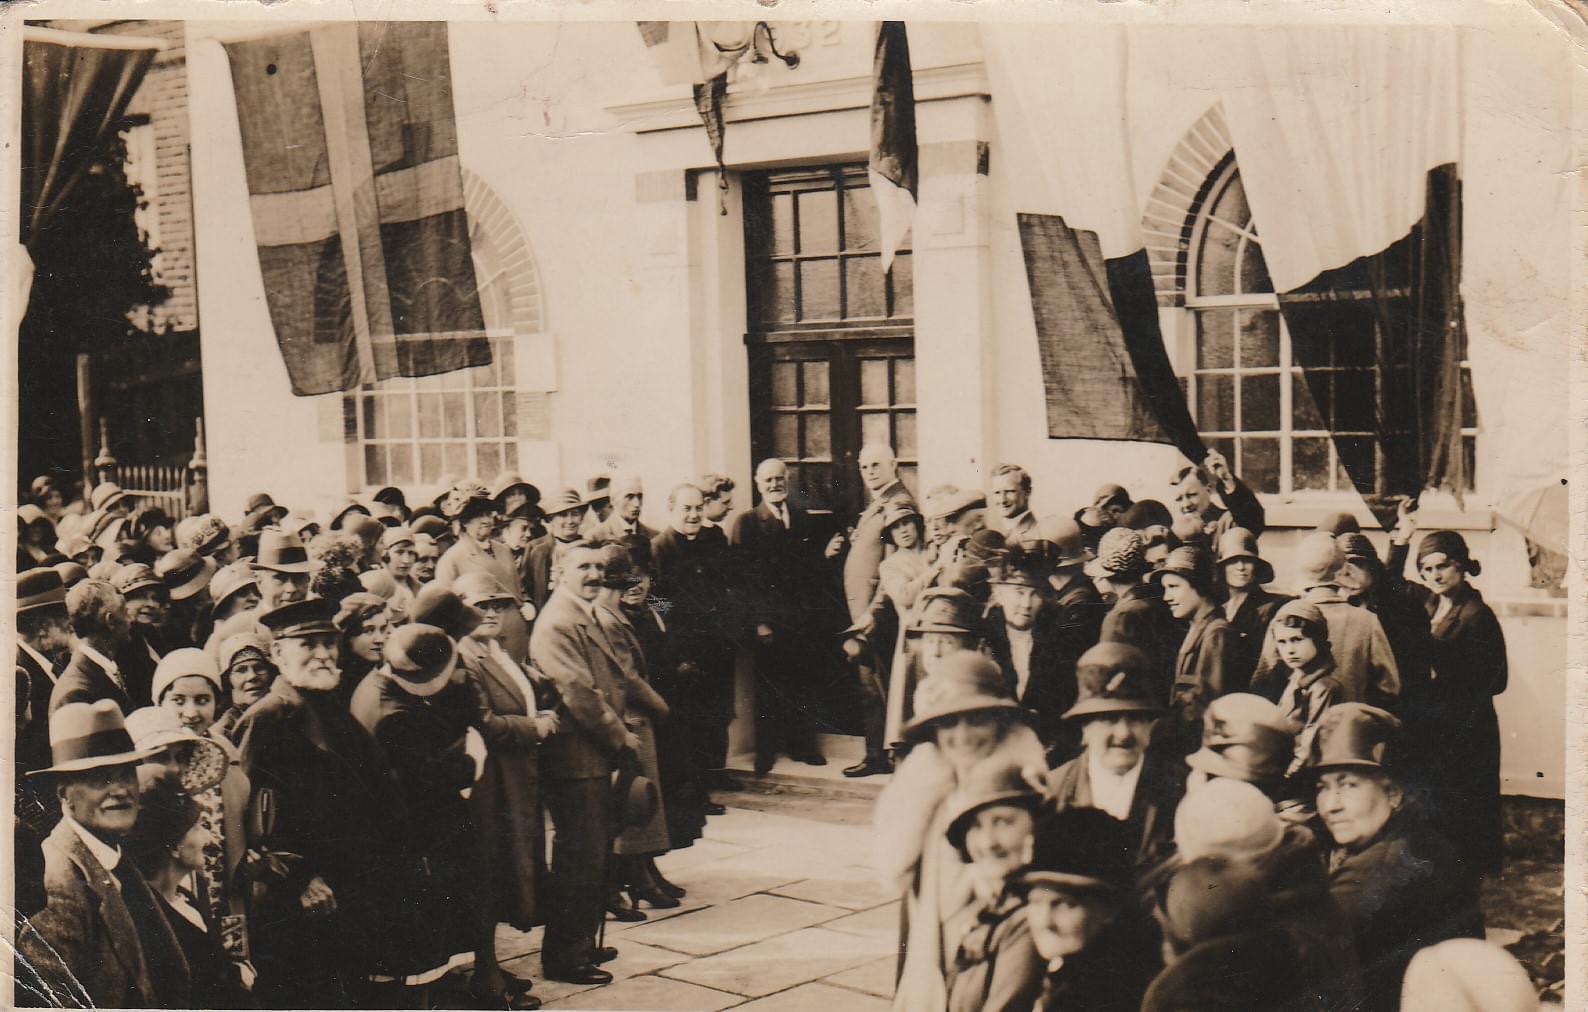 The opening of New Road Methodist Church (now the Fishermen’s Chapel) in 1932. 